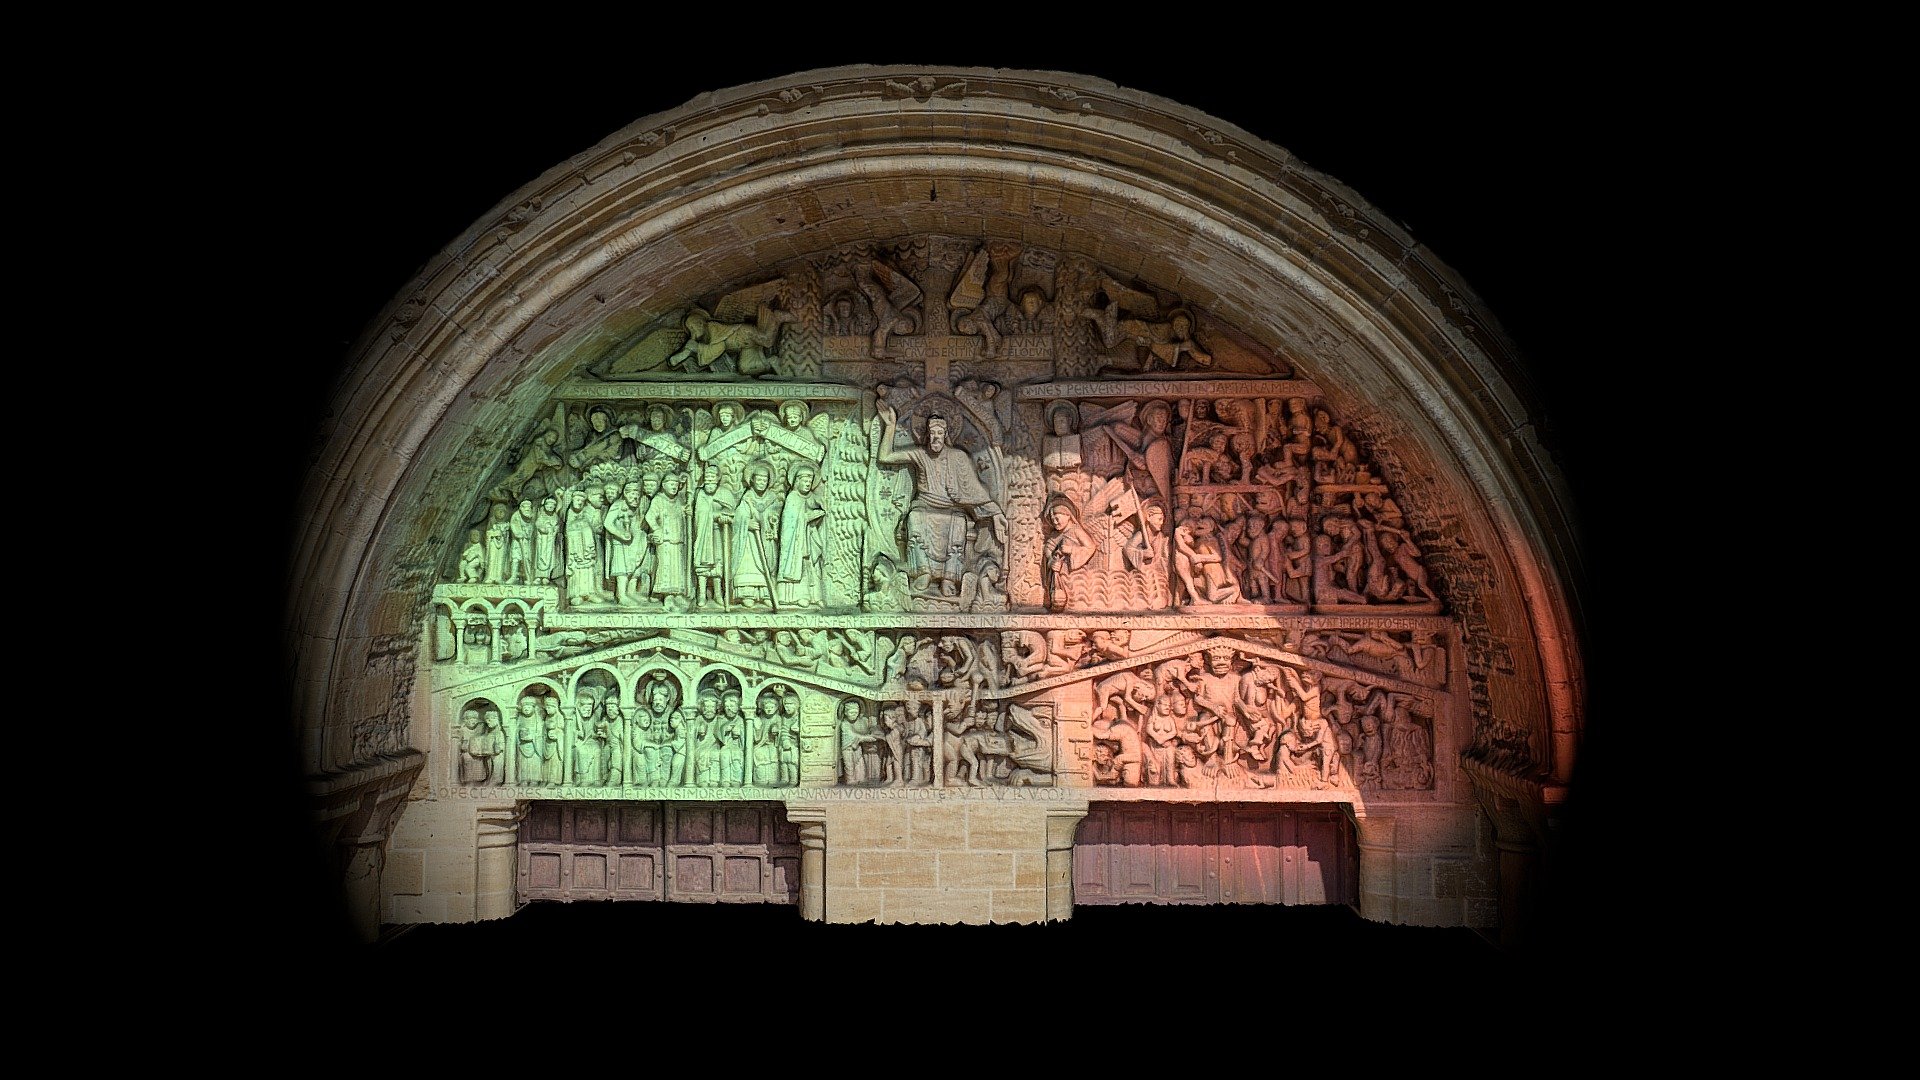 The tympanum of the Last Judgment